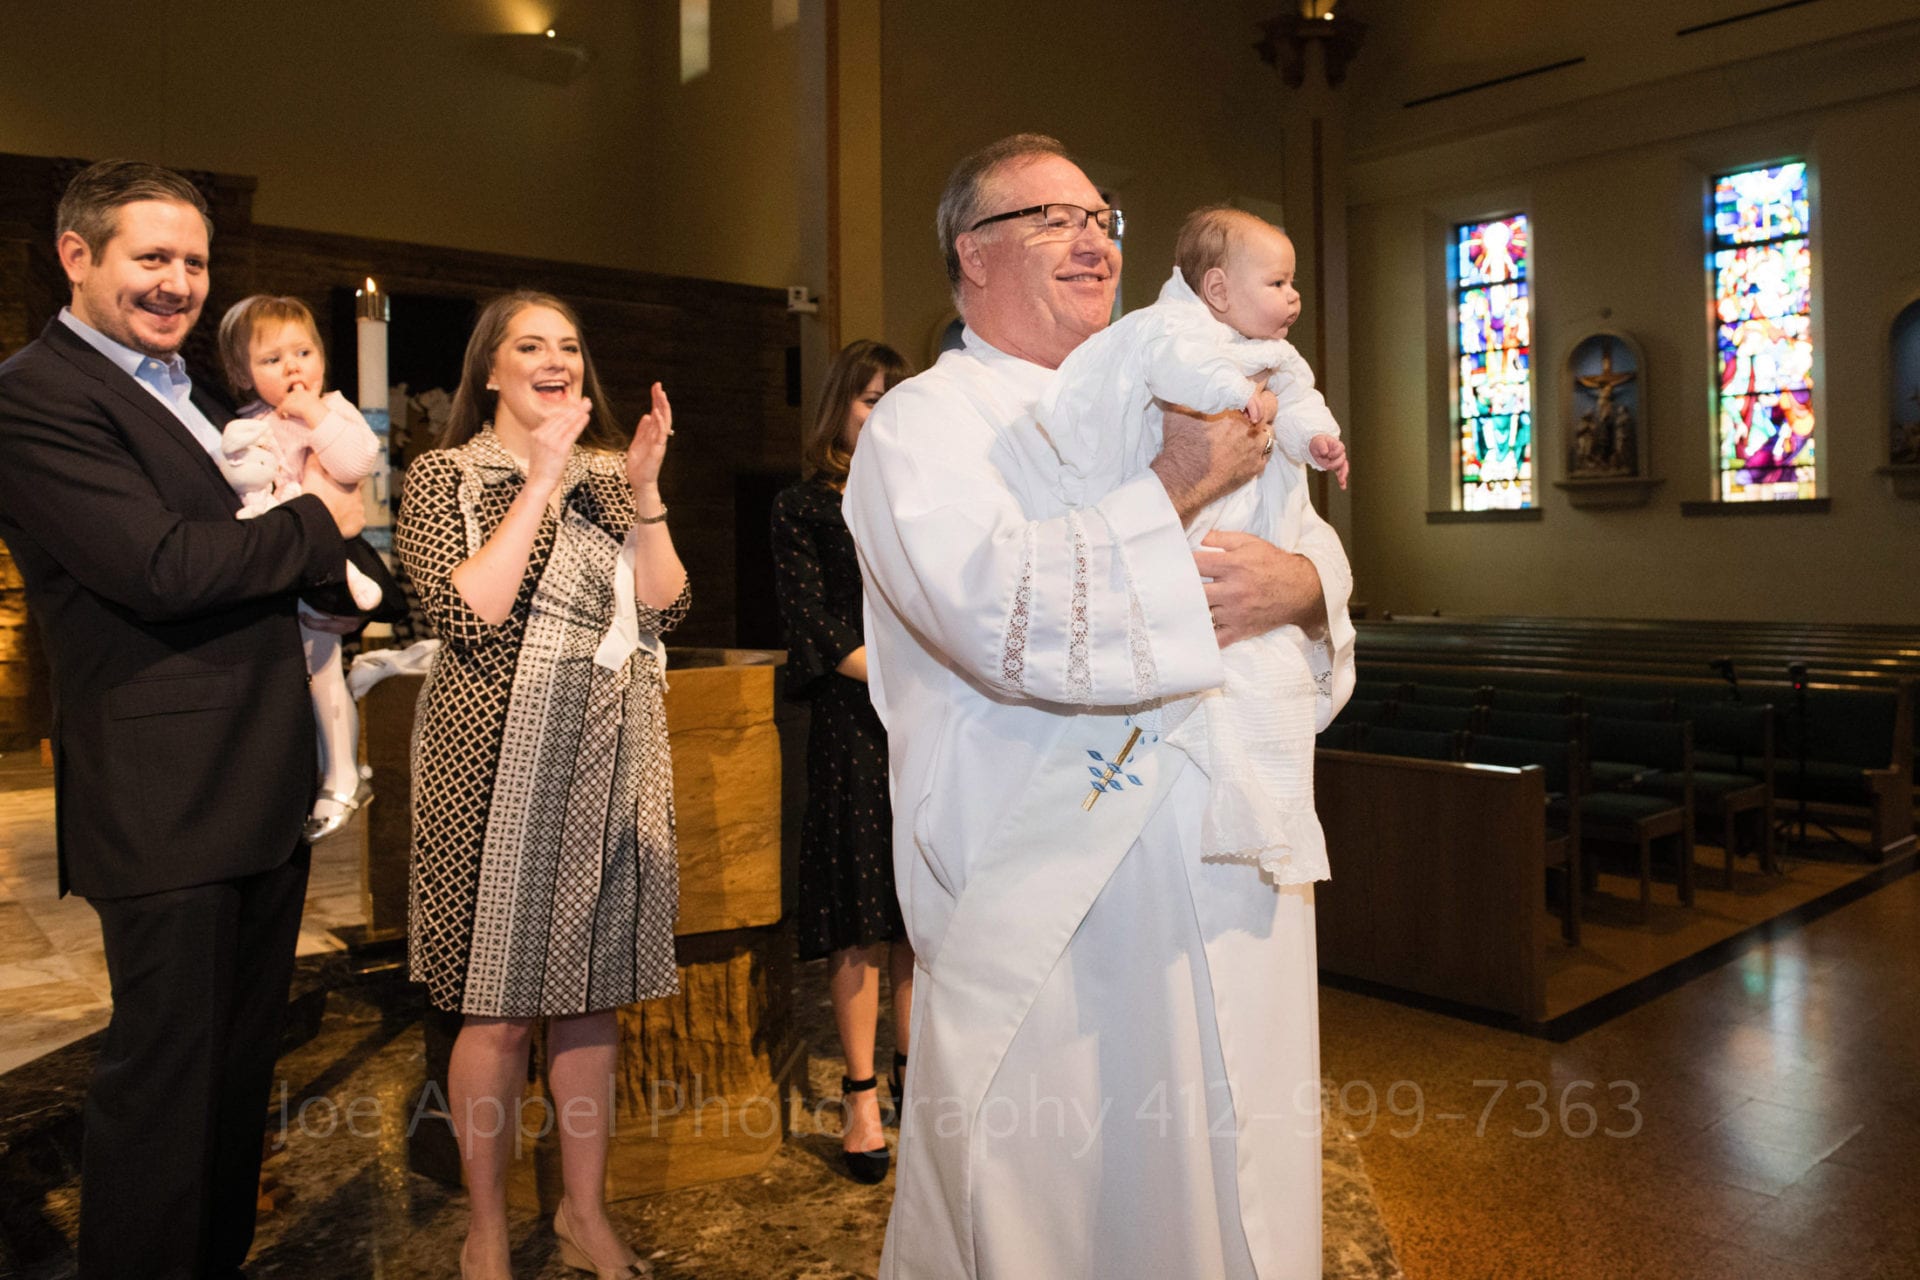 A deacon holds up a newly baptized baby for the congregation to see during a Baptism at Saints John and Paul Parish. The mother and father are standing behind him applauding.